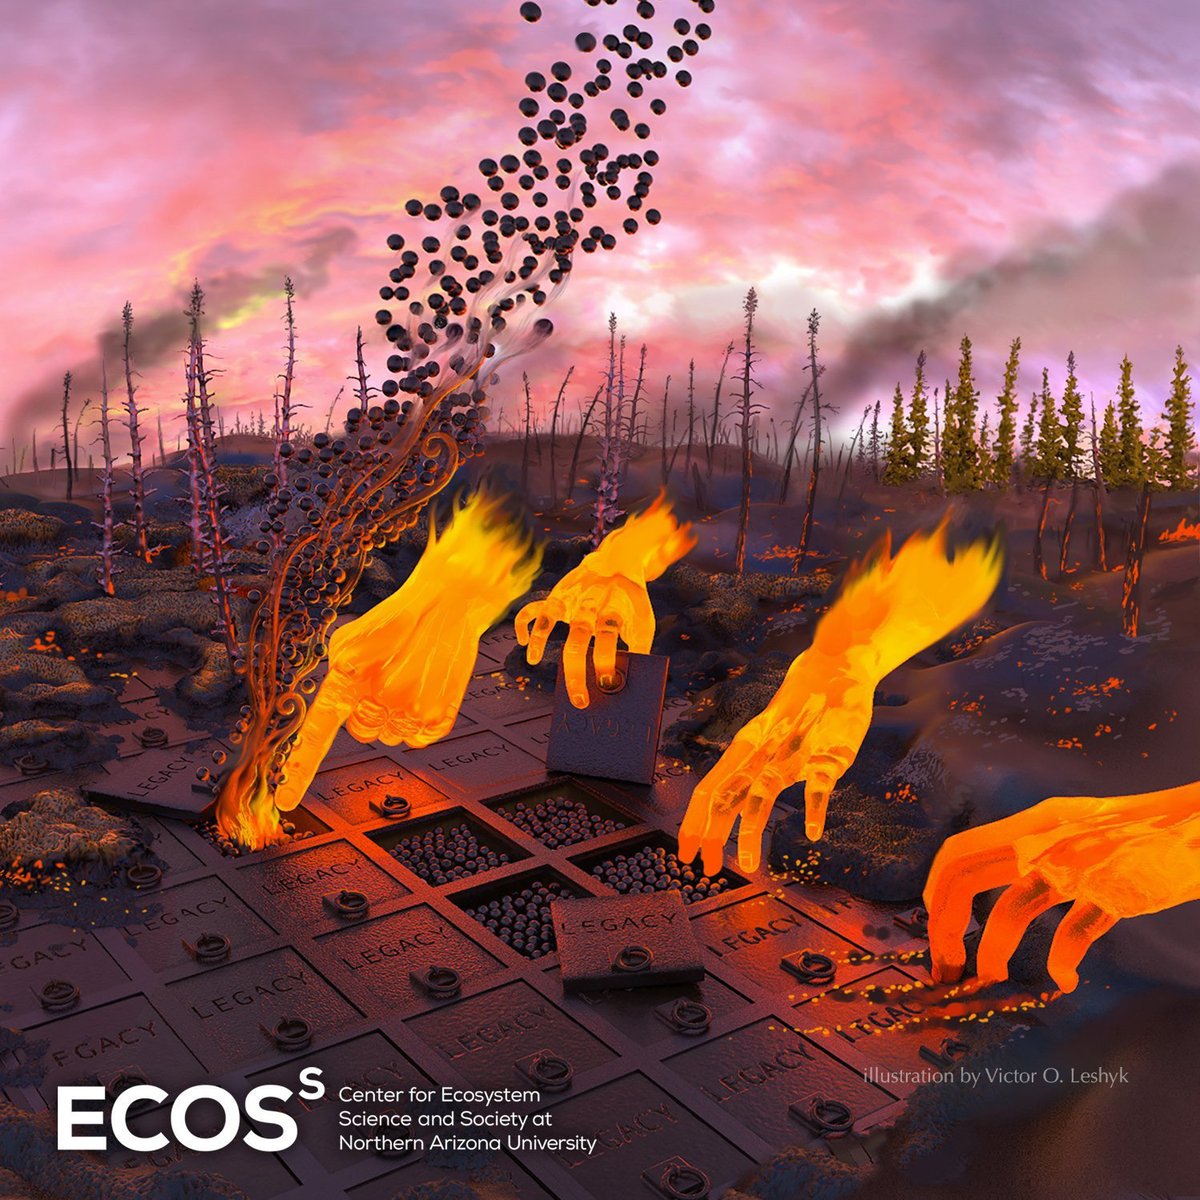  #WorldSoilDay soils of course store things, hide things, keep things...until they don't! The  #anthropocene can make soils relinquish carbon: in my  #Sciart for  @EcossNau, "legacy Carbon" in boreal soils is burnt up by increasing fire intensity and frequency  https://climate.nasa.gov/news/2905/boreal-forest-fires-could-release-deep-soil-carbon/